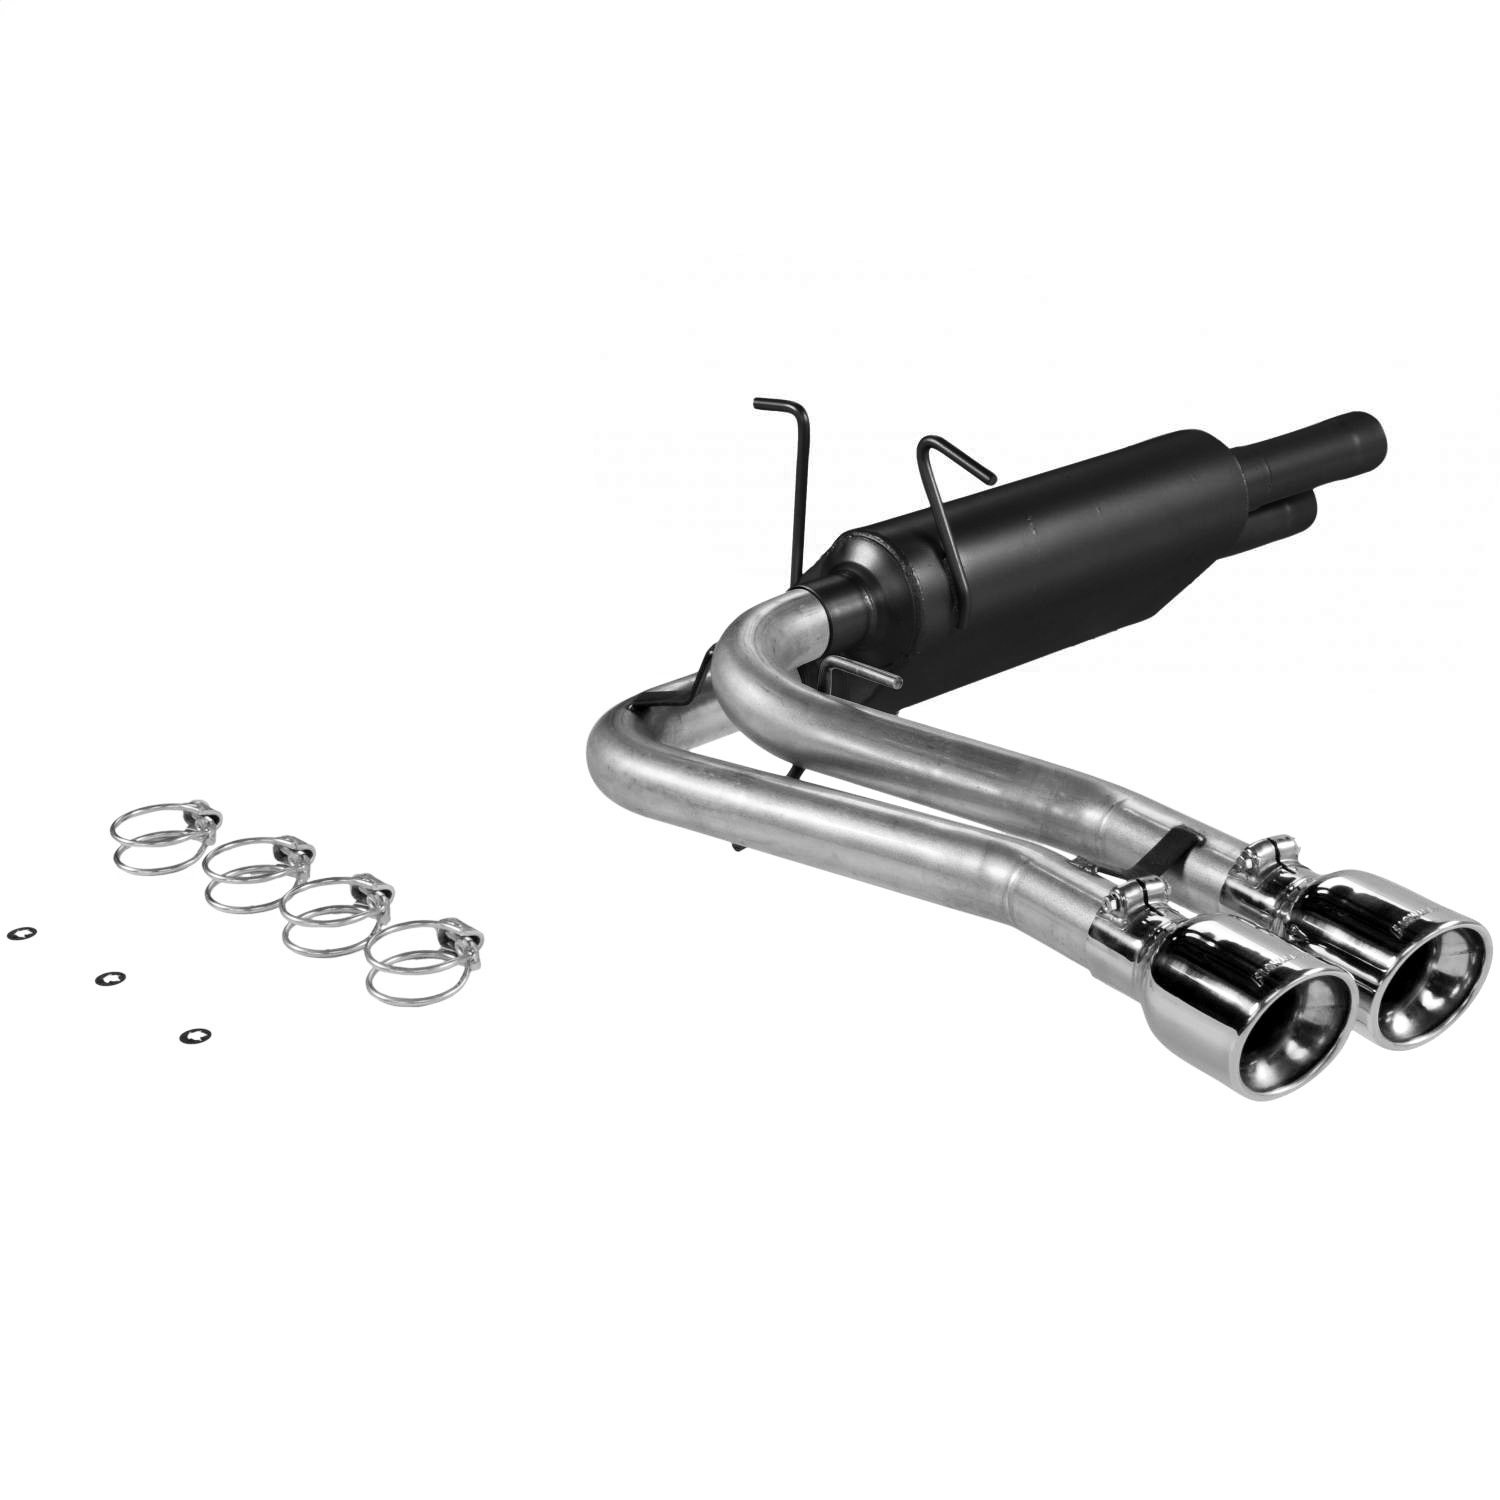 Flowmaster Flowmaster 17367 American Thunder Muscle Truck Exhaust System